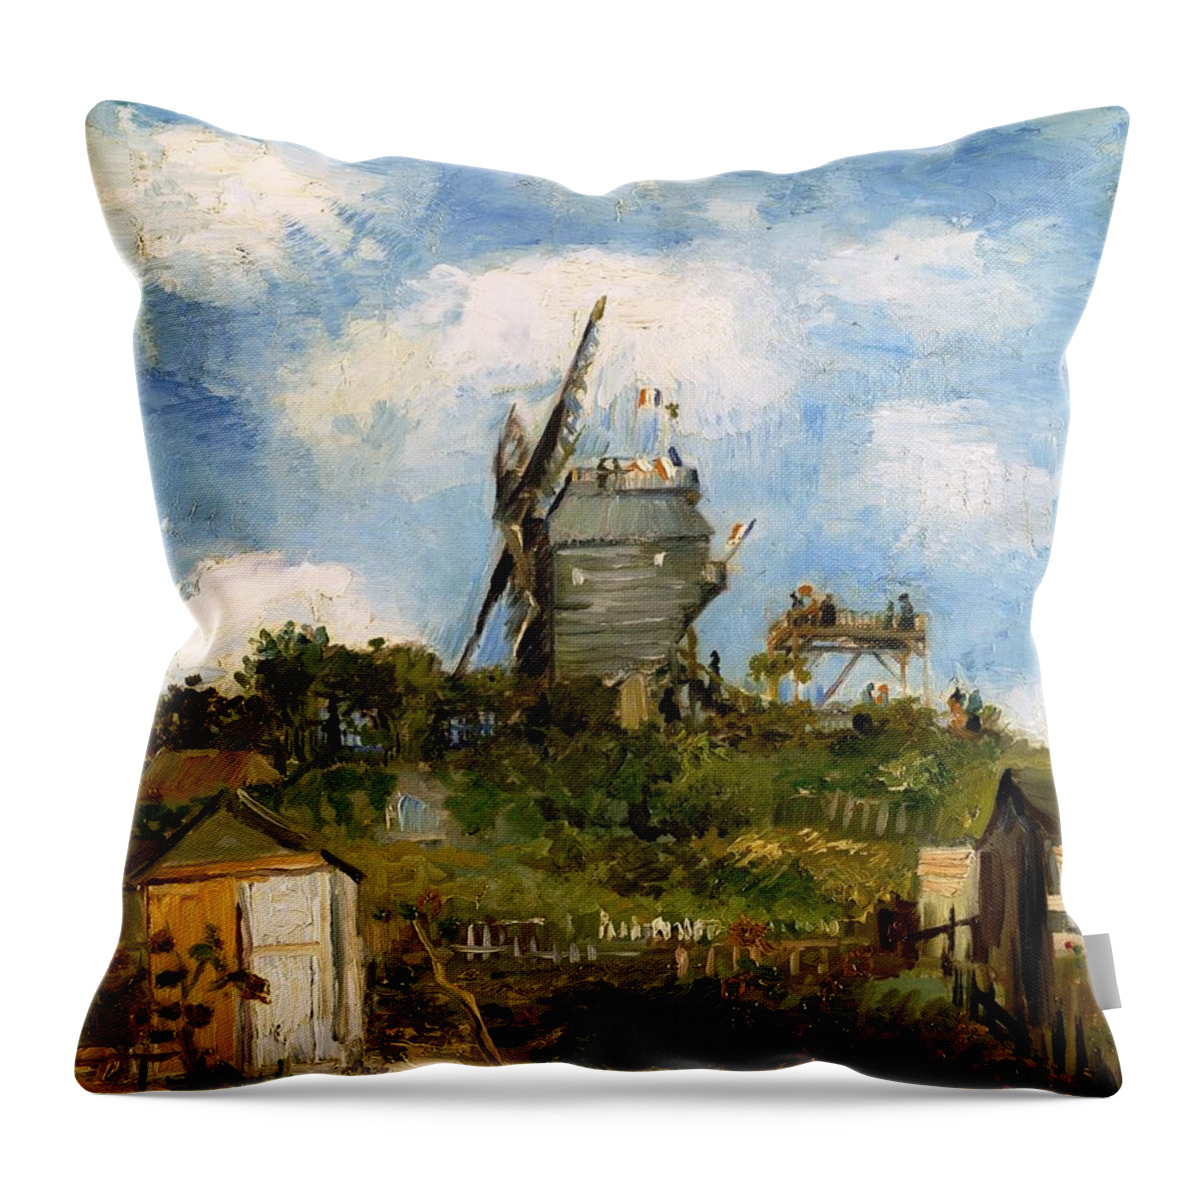 Farm Throw Pillow featuring the photograph Windmill in farm by Sumit Mehndiratta